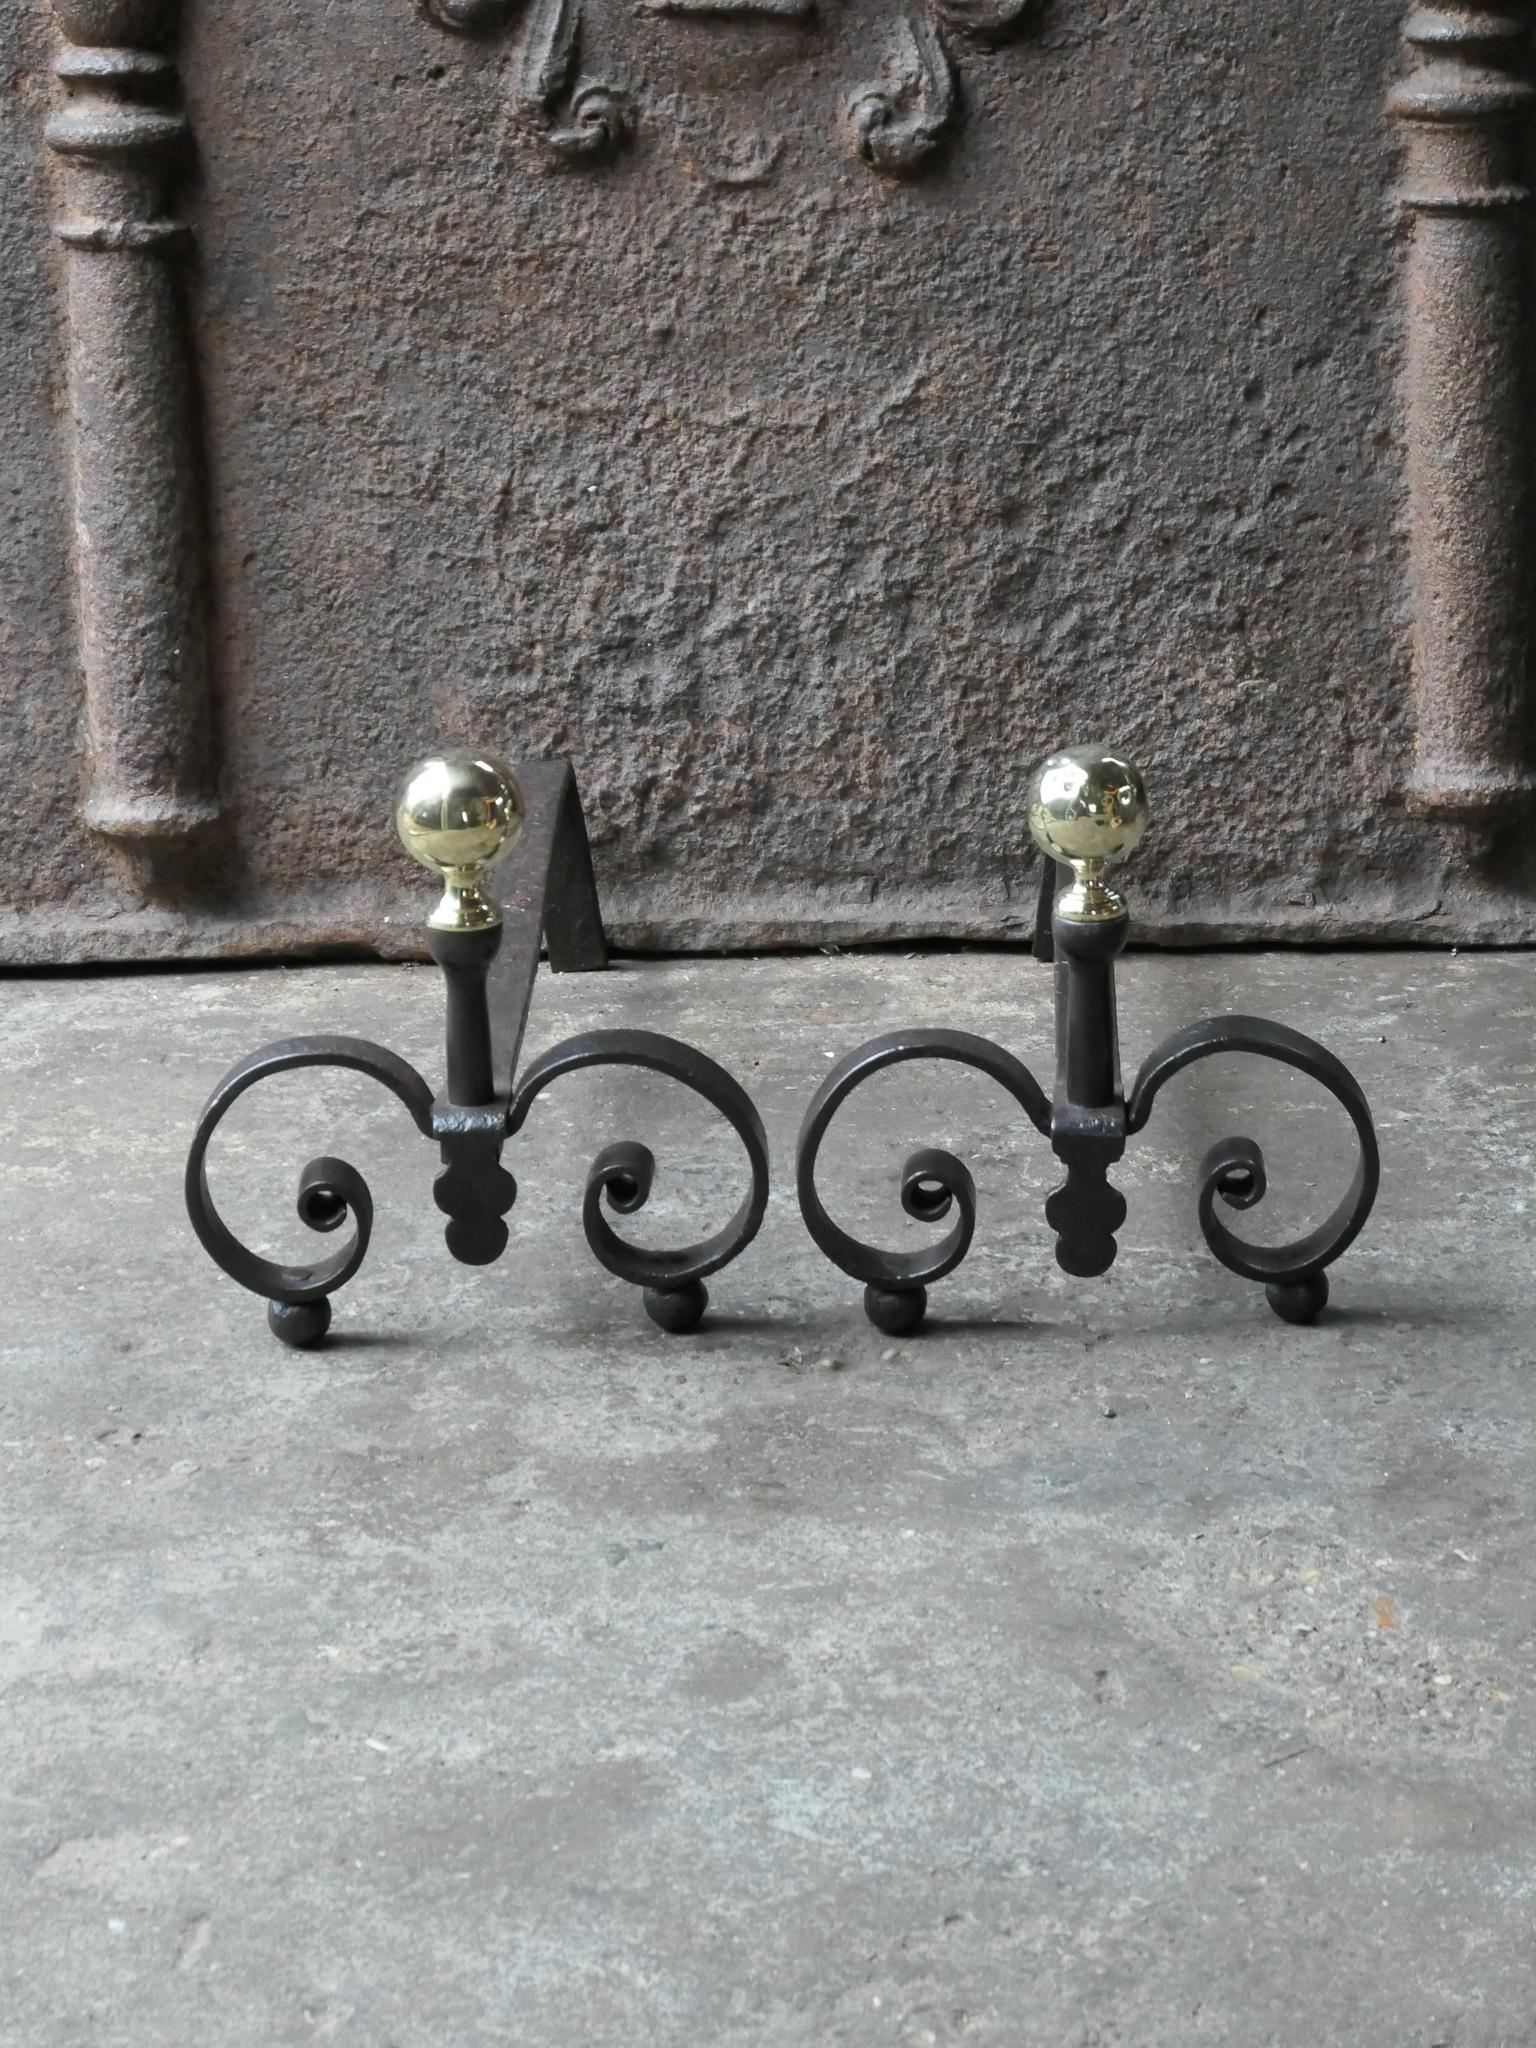 19th century French Louis XV andirons made of wrought iron with decorations made of polished brass. The condition is good. The andirons are fit for use in the fireplace.







